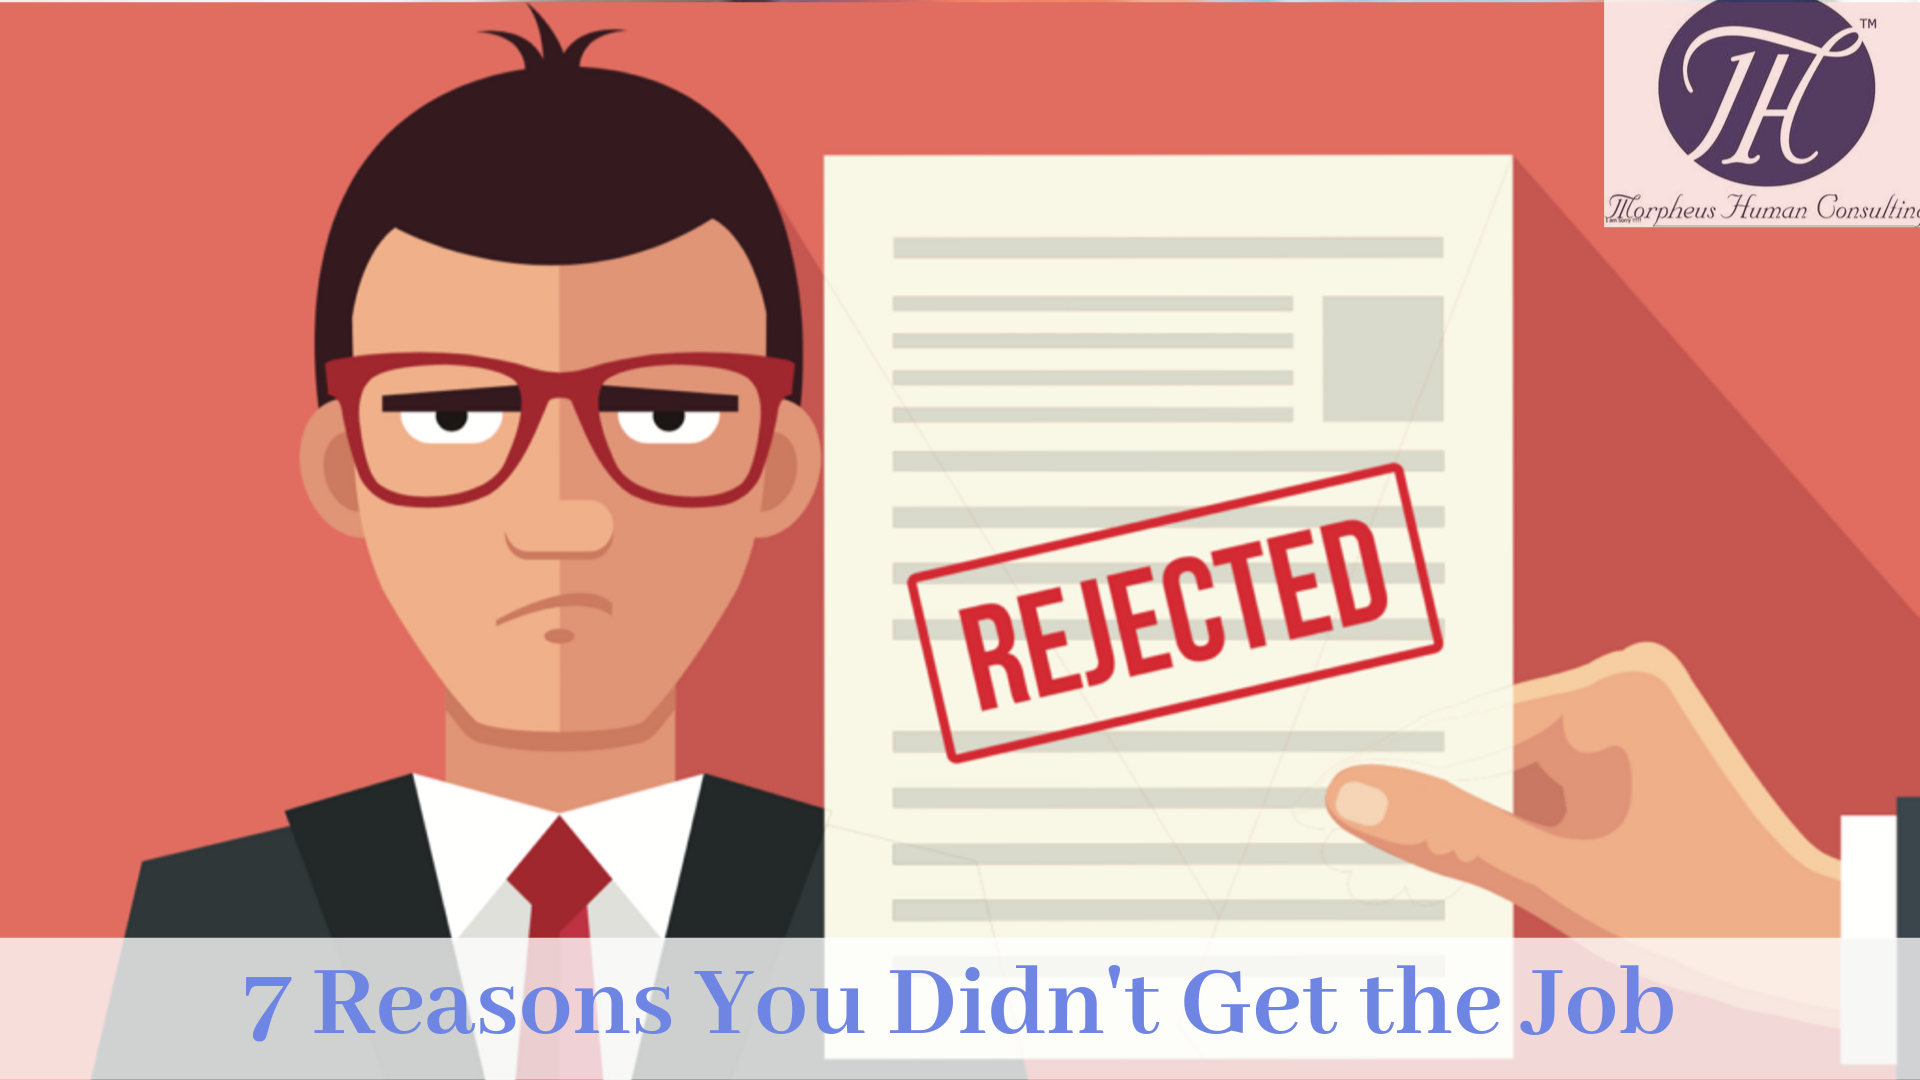 7 Reasons You Didn't Get the Job